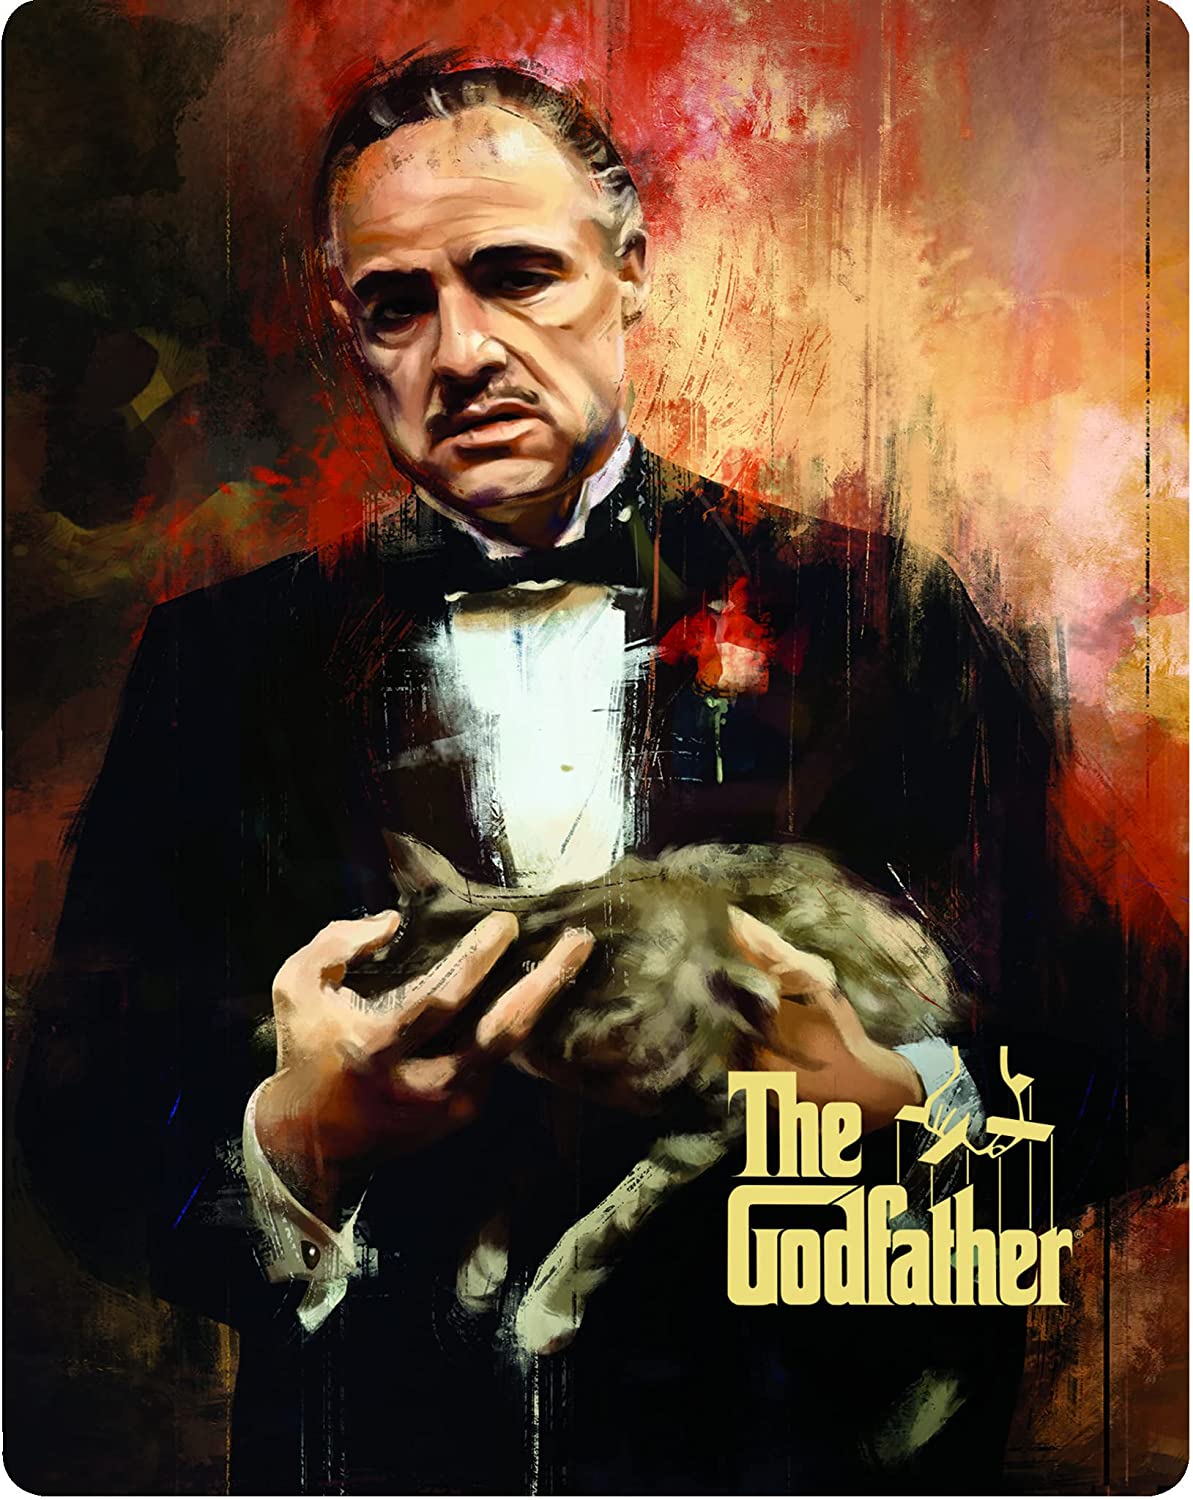 The Godfather Limited Edition 4k Blu-ray SteelBook